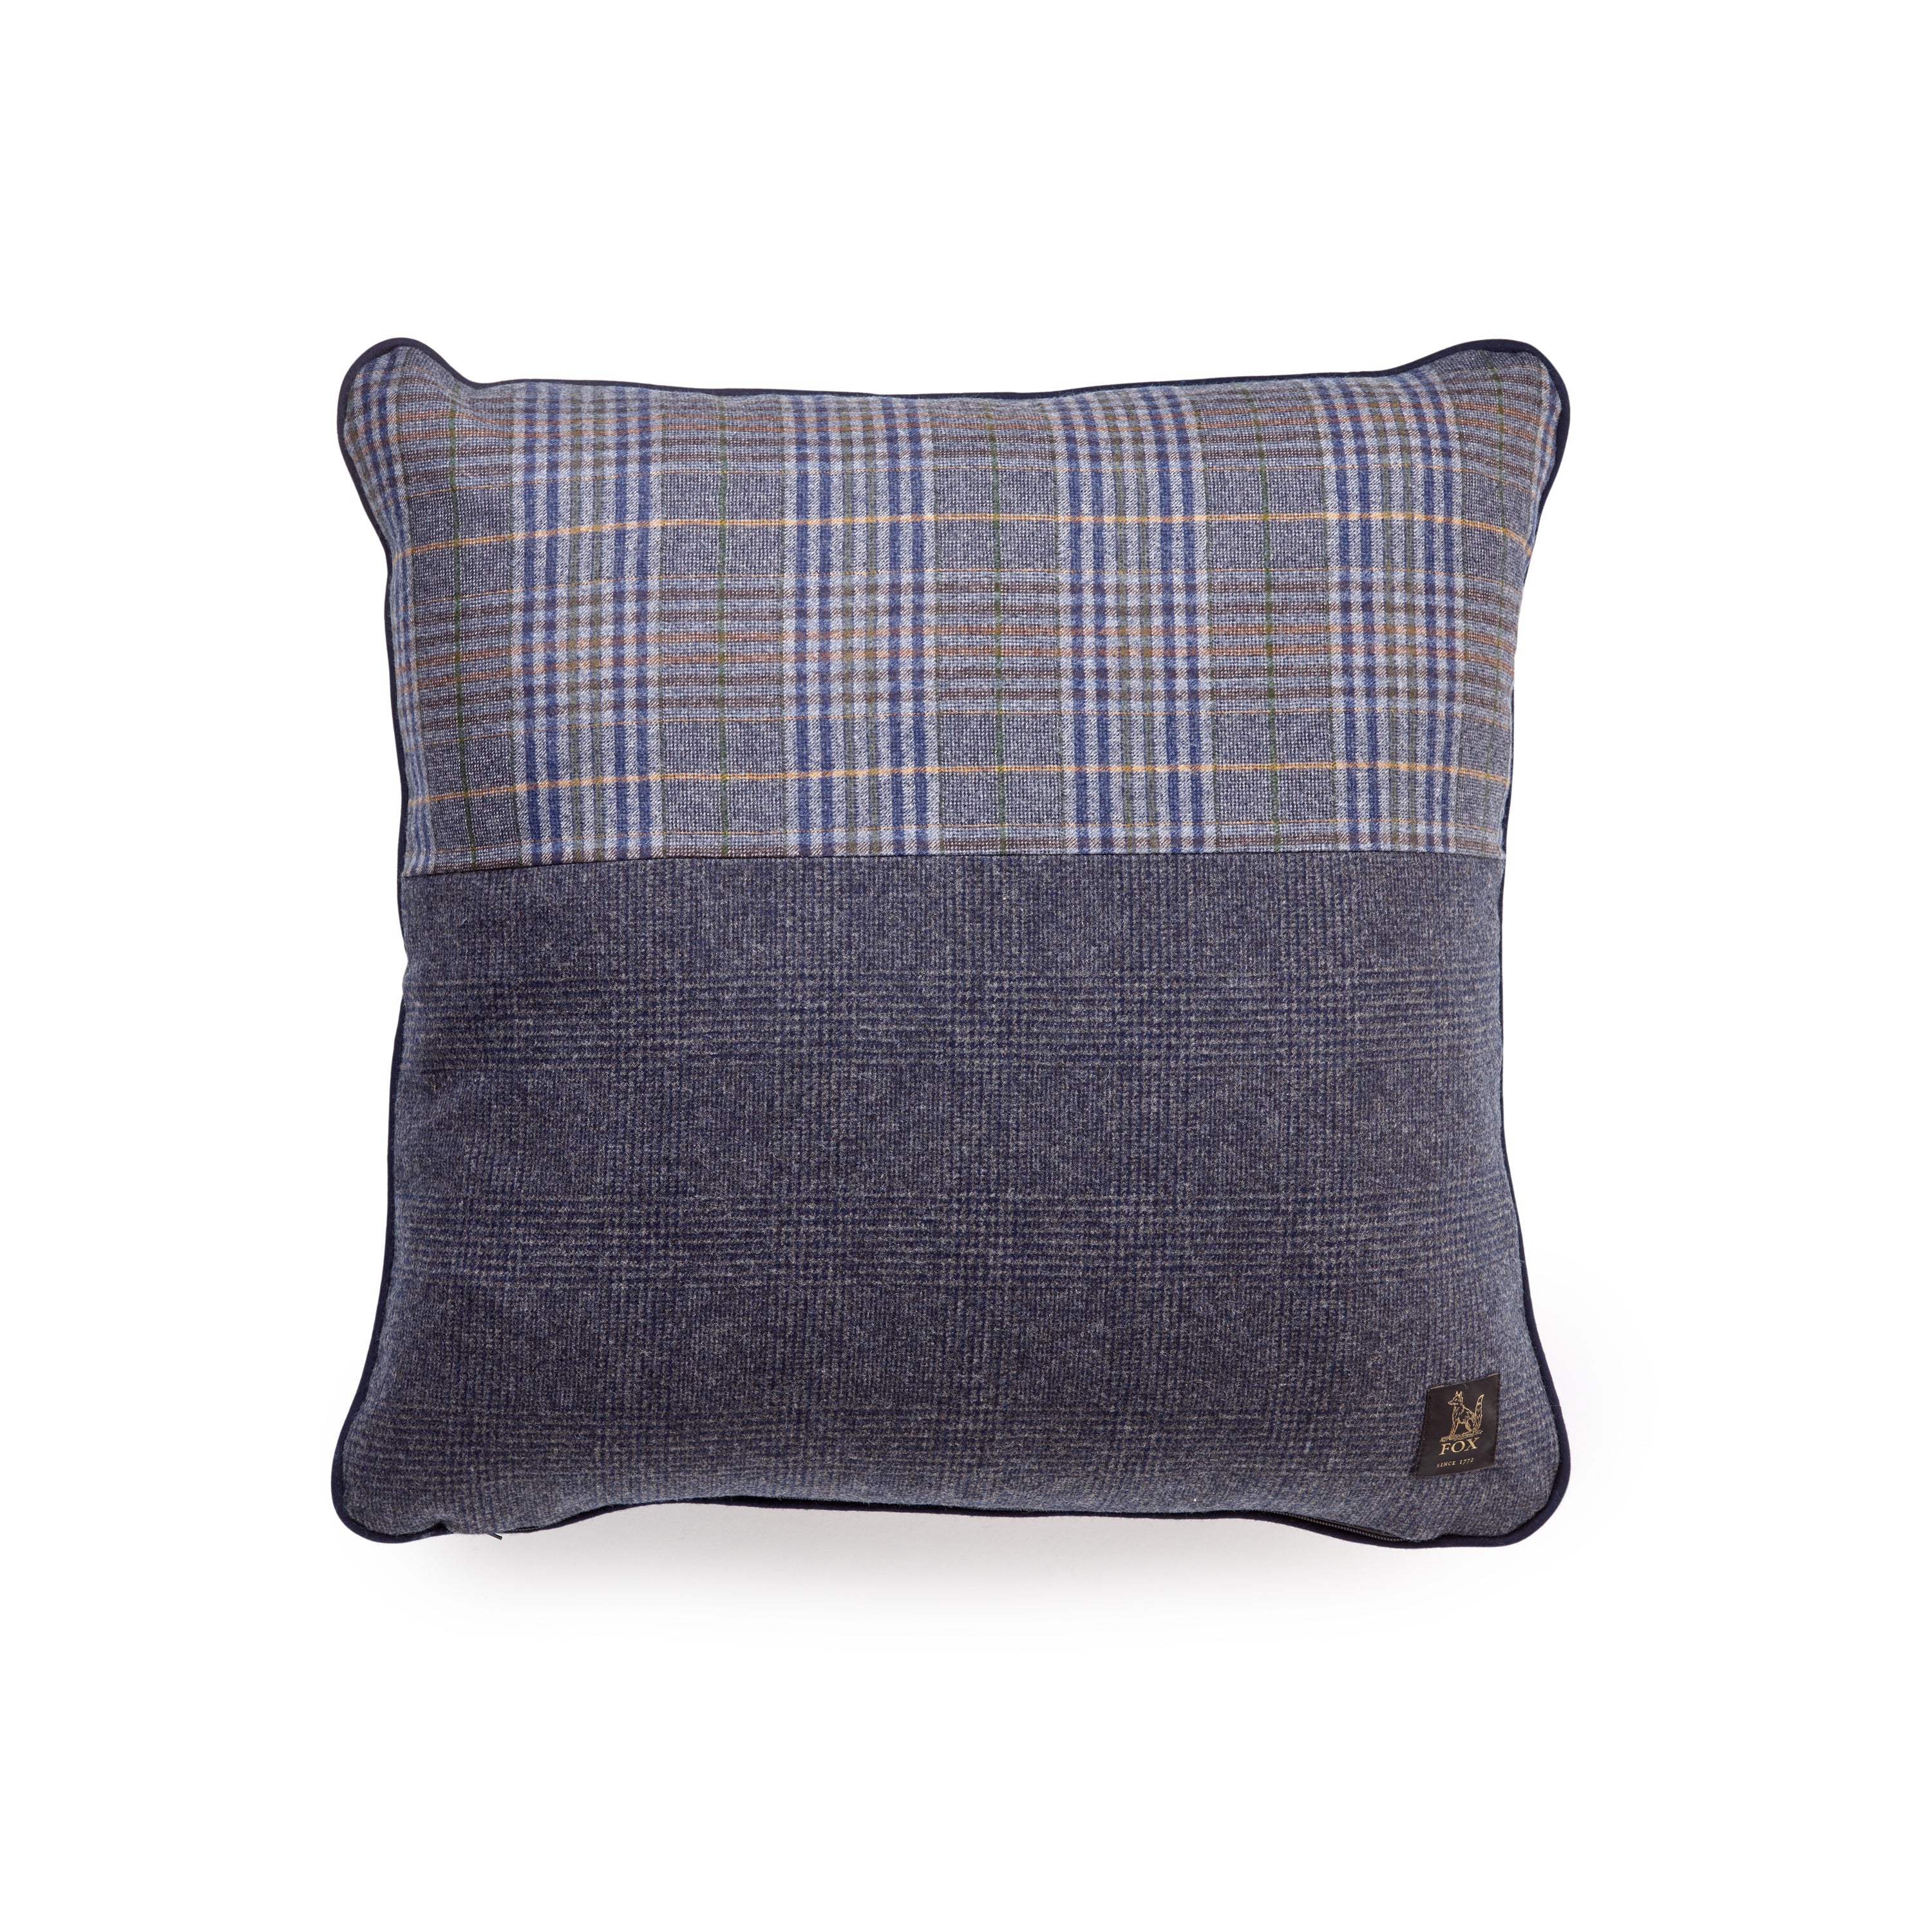 Fox Flannel Mixed Check Patchwork Cushion Cover